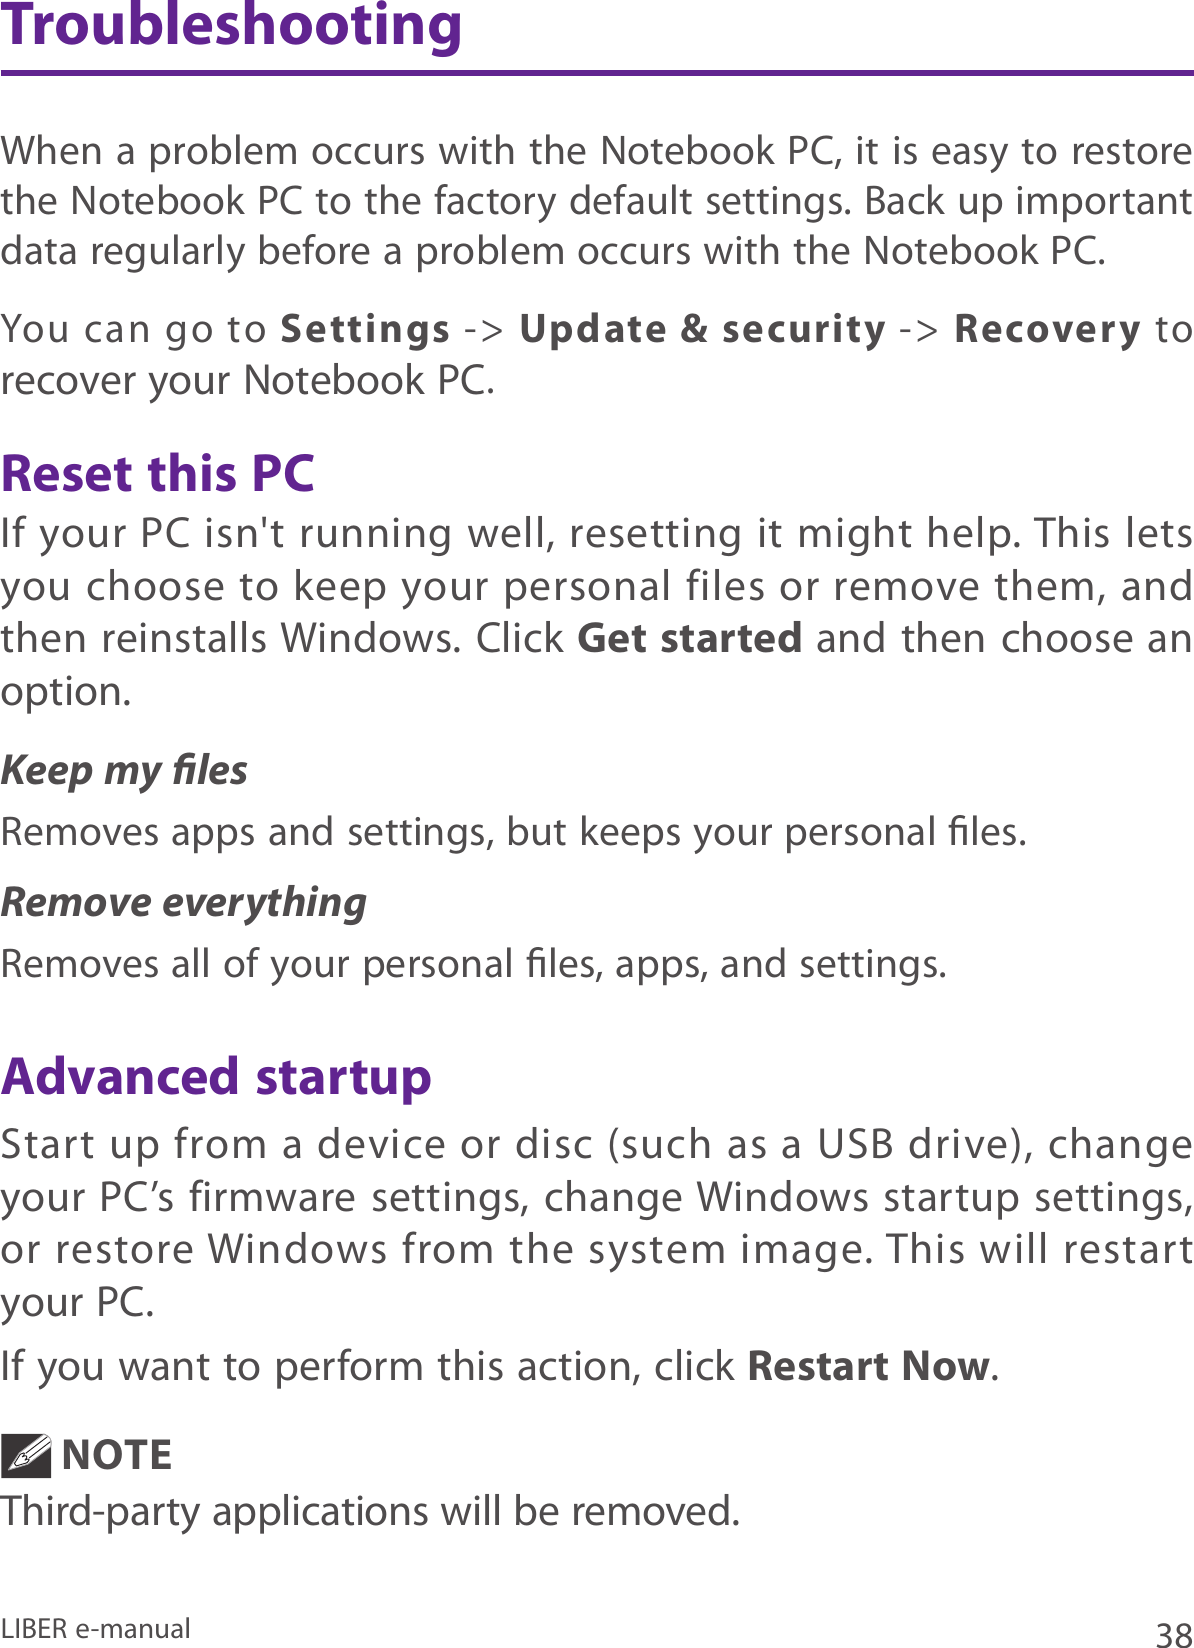 38LIBER e-manualIf your PC isn&apos;t  running well, resetting it might  help. This lets you choose  to keep your  personal files  or remove them, and then reinstalls Windows. Click Get started and then choose an option. Keep my lesRemoves apps and settings, but keeps your personal les.Remove everythingRemoves all of your personal les, apps, and settings.Start  up from a  device  or disc  (such as  a USB  drive),  change your  PC’s firmware  settings, change Windows startup settings, or restore Windows from  the system  image. This will restart your PC. If you want to perform this action, click Restart Now.NOTE Third-party applications will be removed.You  can  go  to  Settings -&gt; Update &amp; security -&gt;  Recovery to recover your Notebook PC.When a problem occurs with the Notebook PC, it is easy to restore the Notebook PC to the factory default settings. Back up important data regularly before a problem occurs with the Notebook PC.TroubleshootingReset this PCAdvanced startup